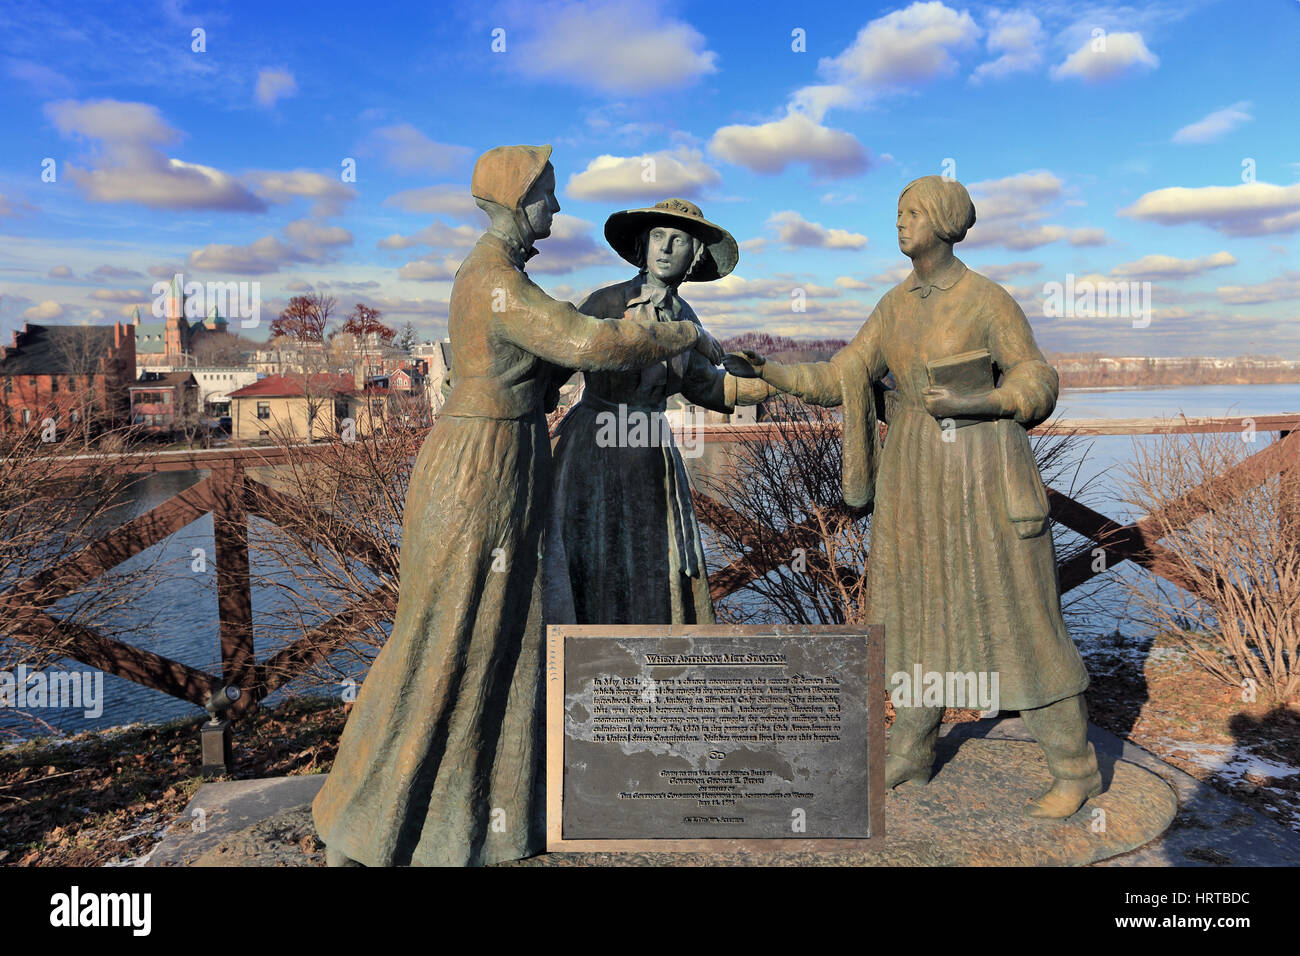 Sculpture depicting May 1851 chance meeting of Elizabeth Caty Stanton and Susan B. Anthony Seneca Falls New York birthplace of the women's right movem Stock Photo